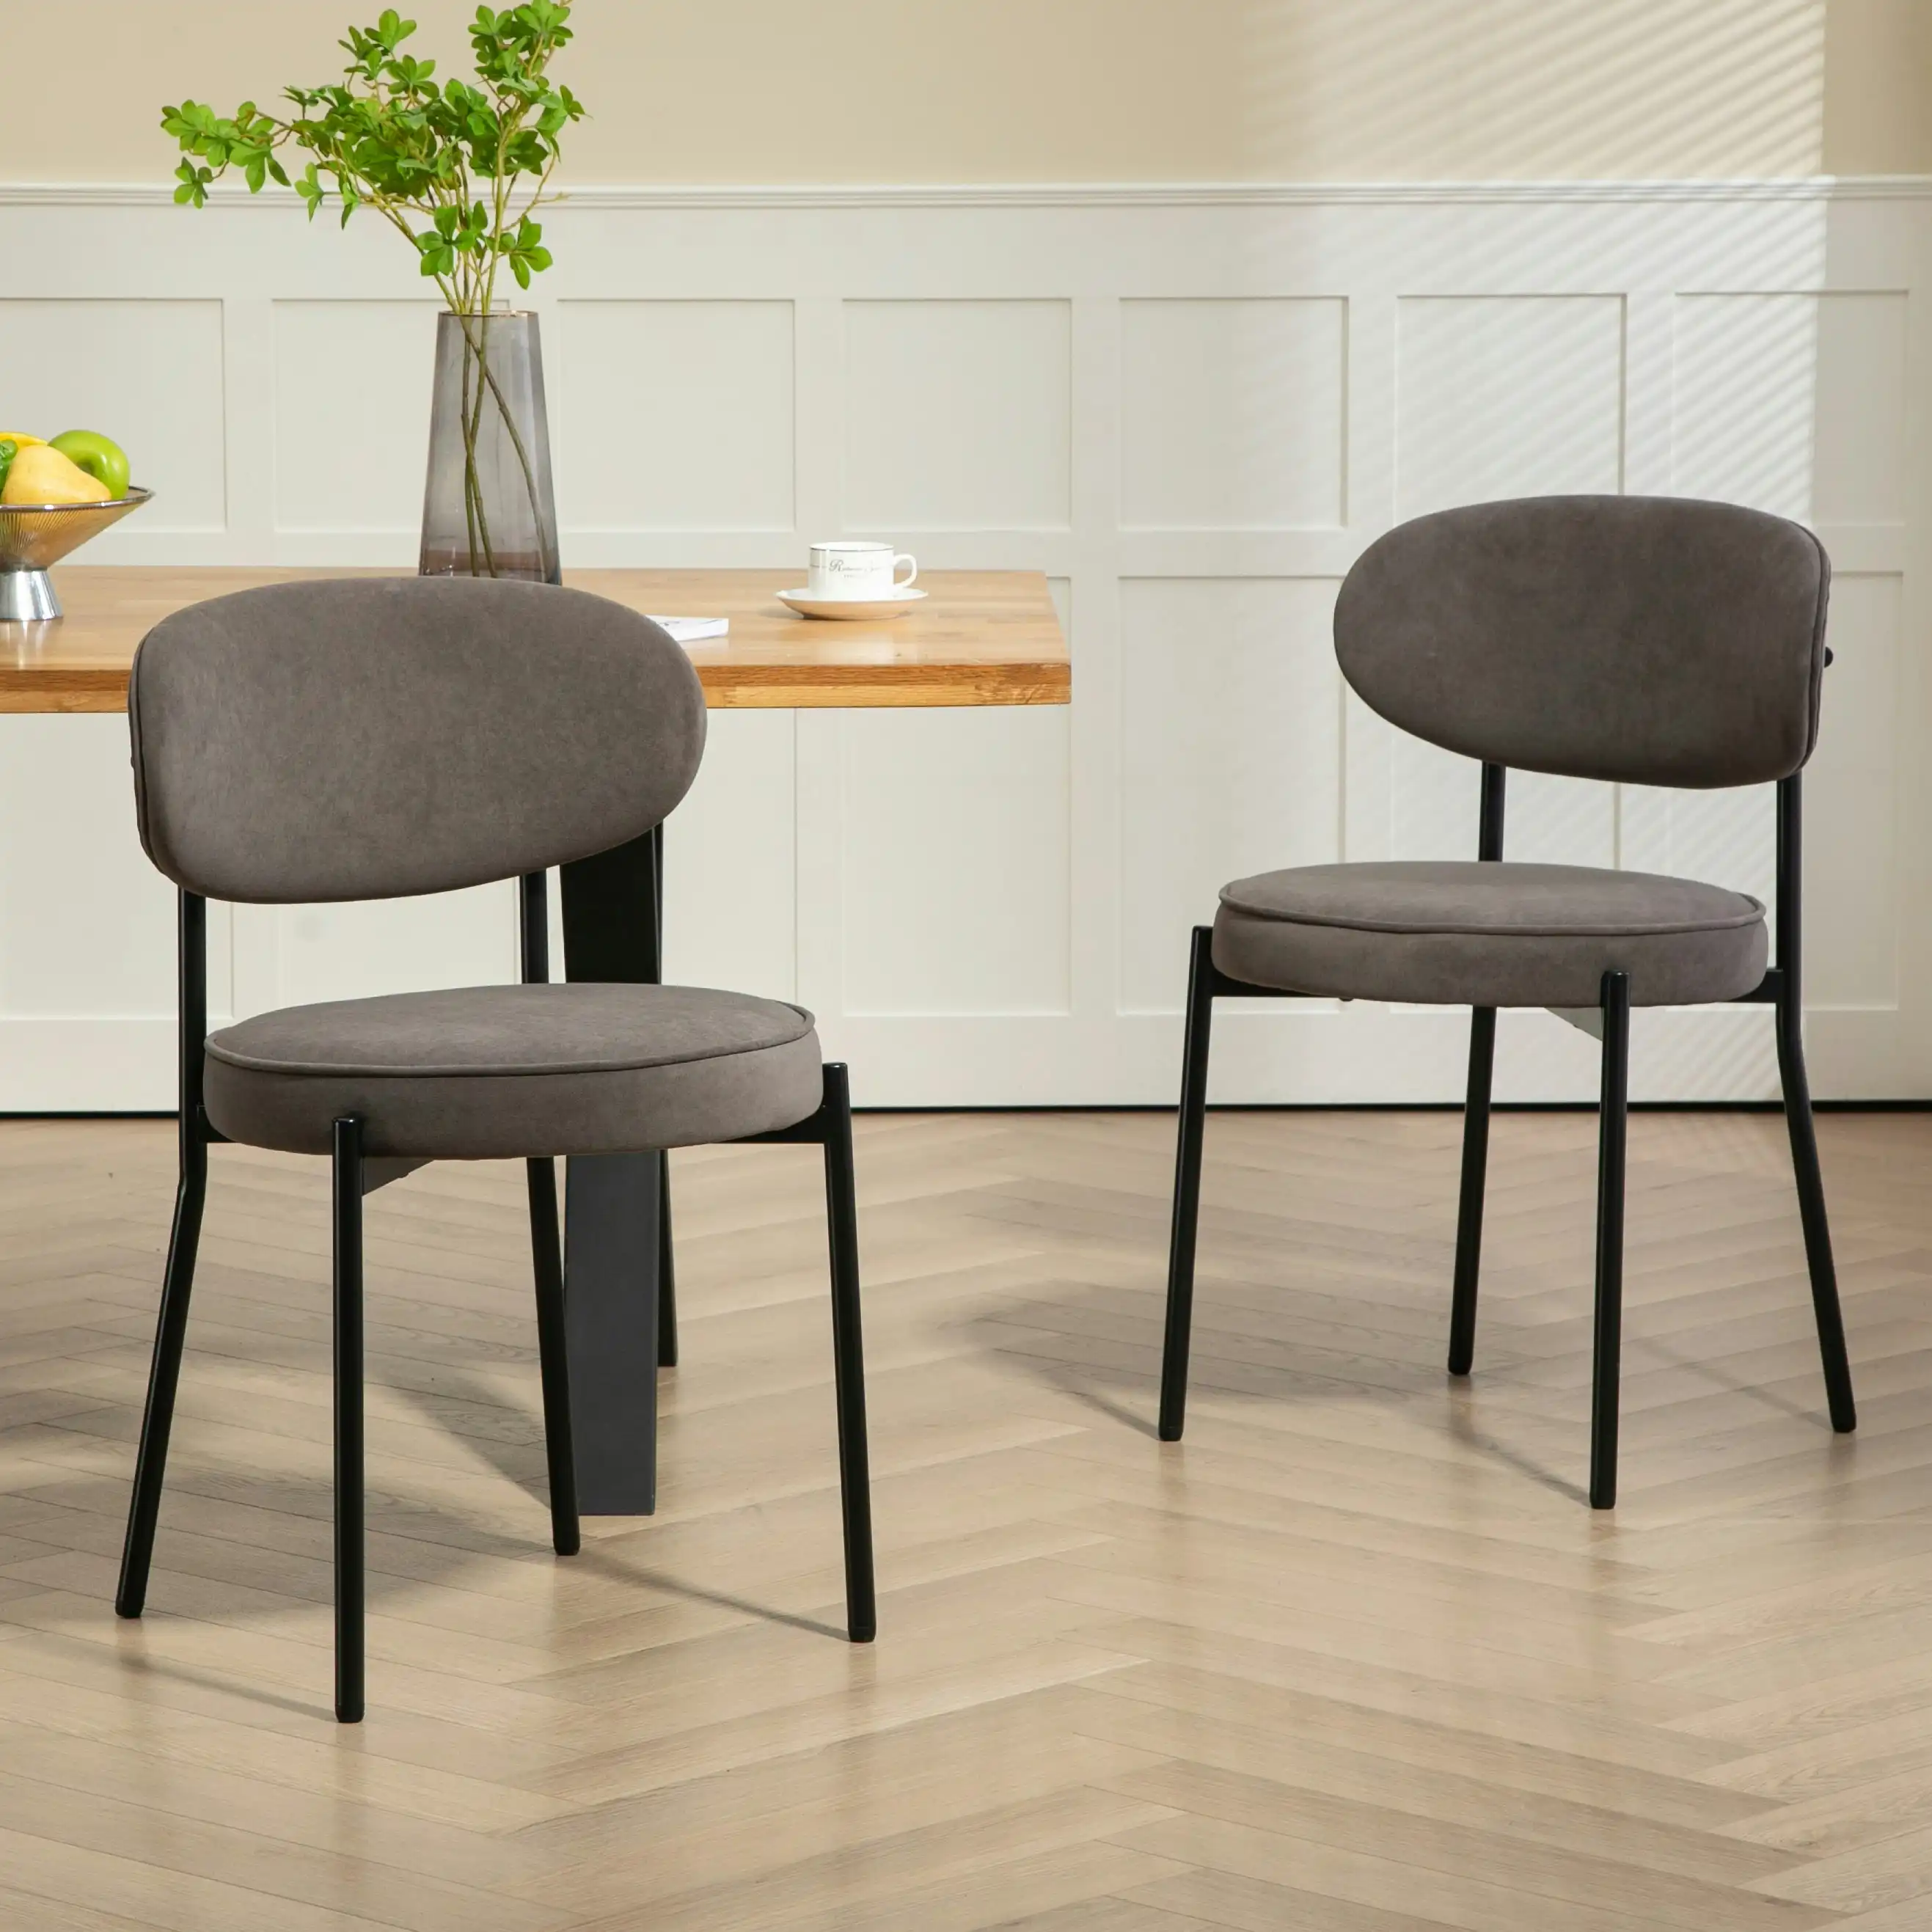 IHOMDEC Mid-Century Round Upholstered Dining Chair with Metal Frame and Legs Set of 2 Dark Grey